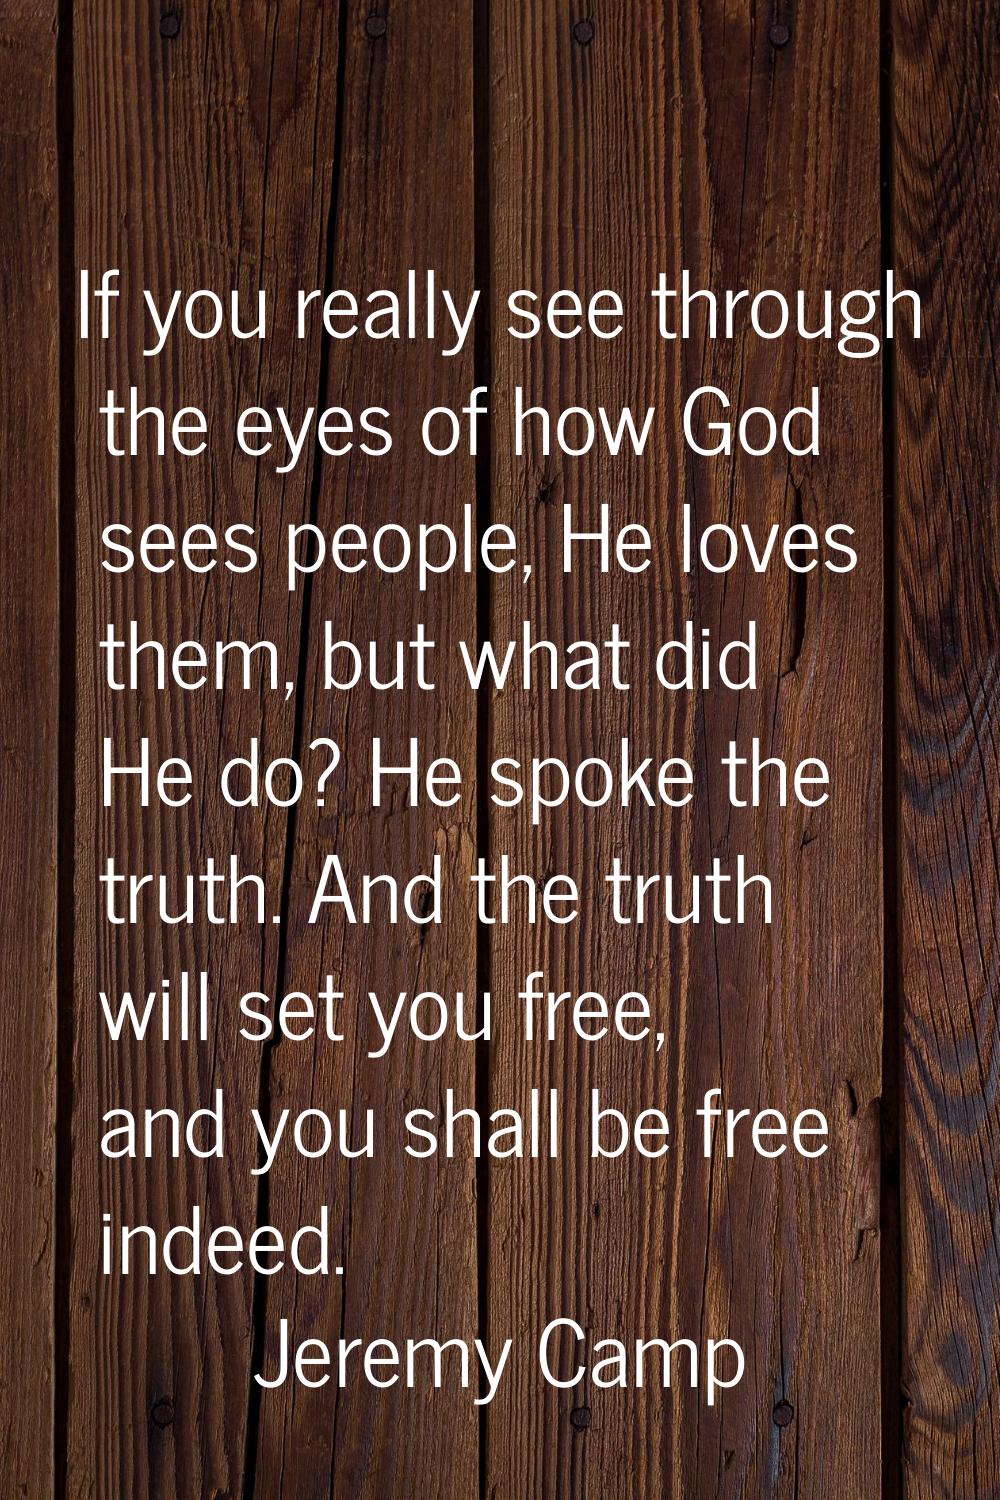 If you really see through the eyes of how God sees people, He loves them, but what did He do? He sp